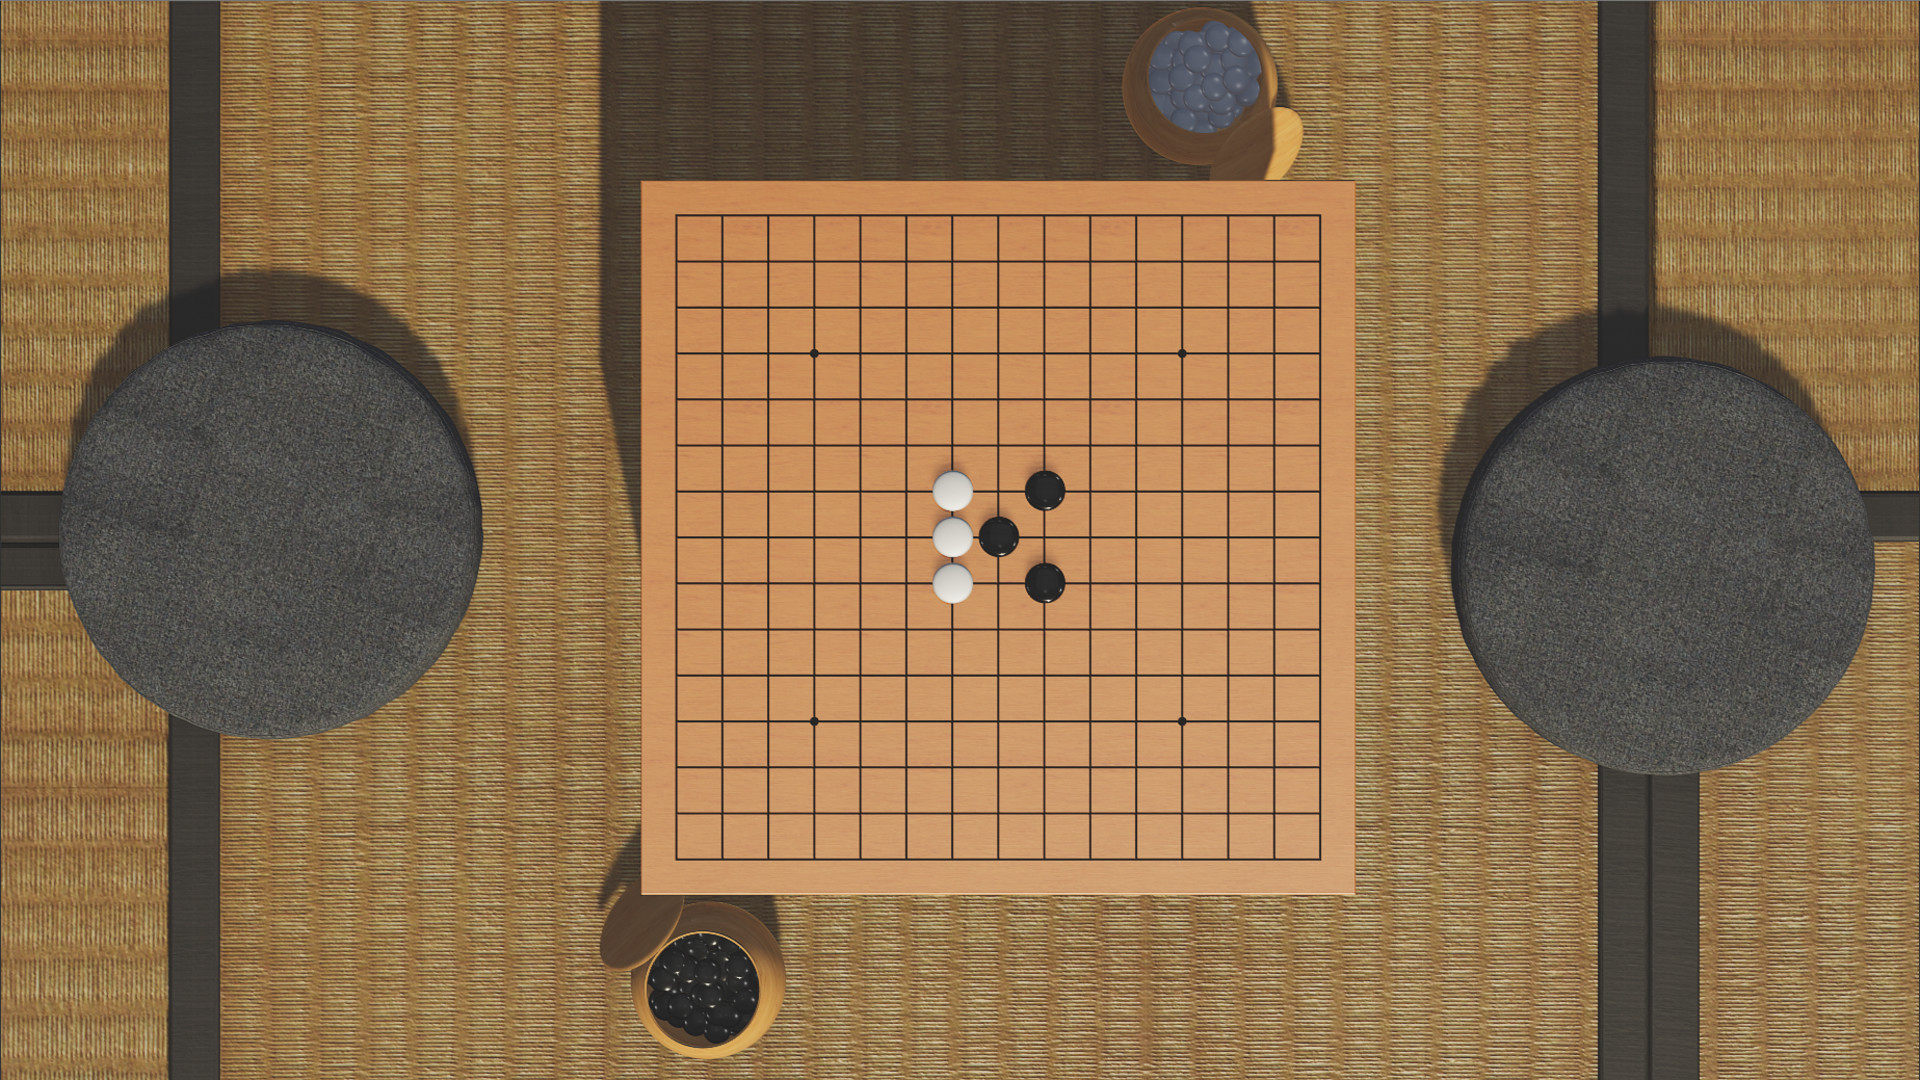 Gomoku Let's Go - SteamSpy - All the data and stats about Steam games